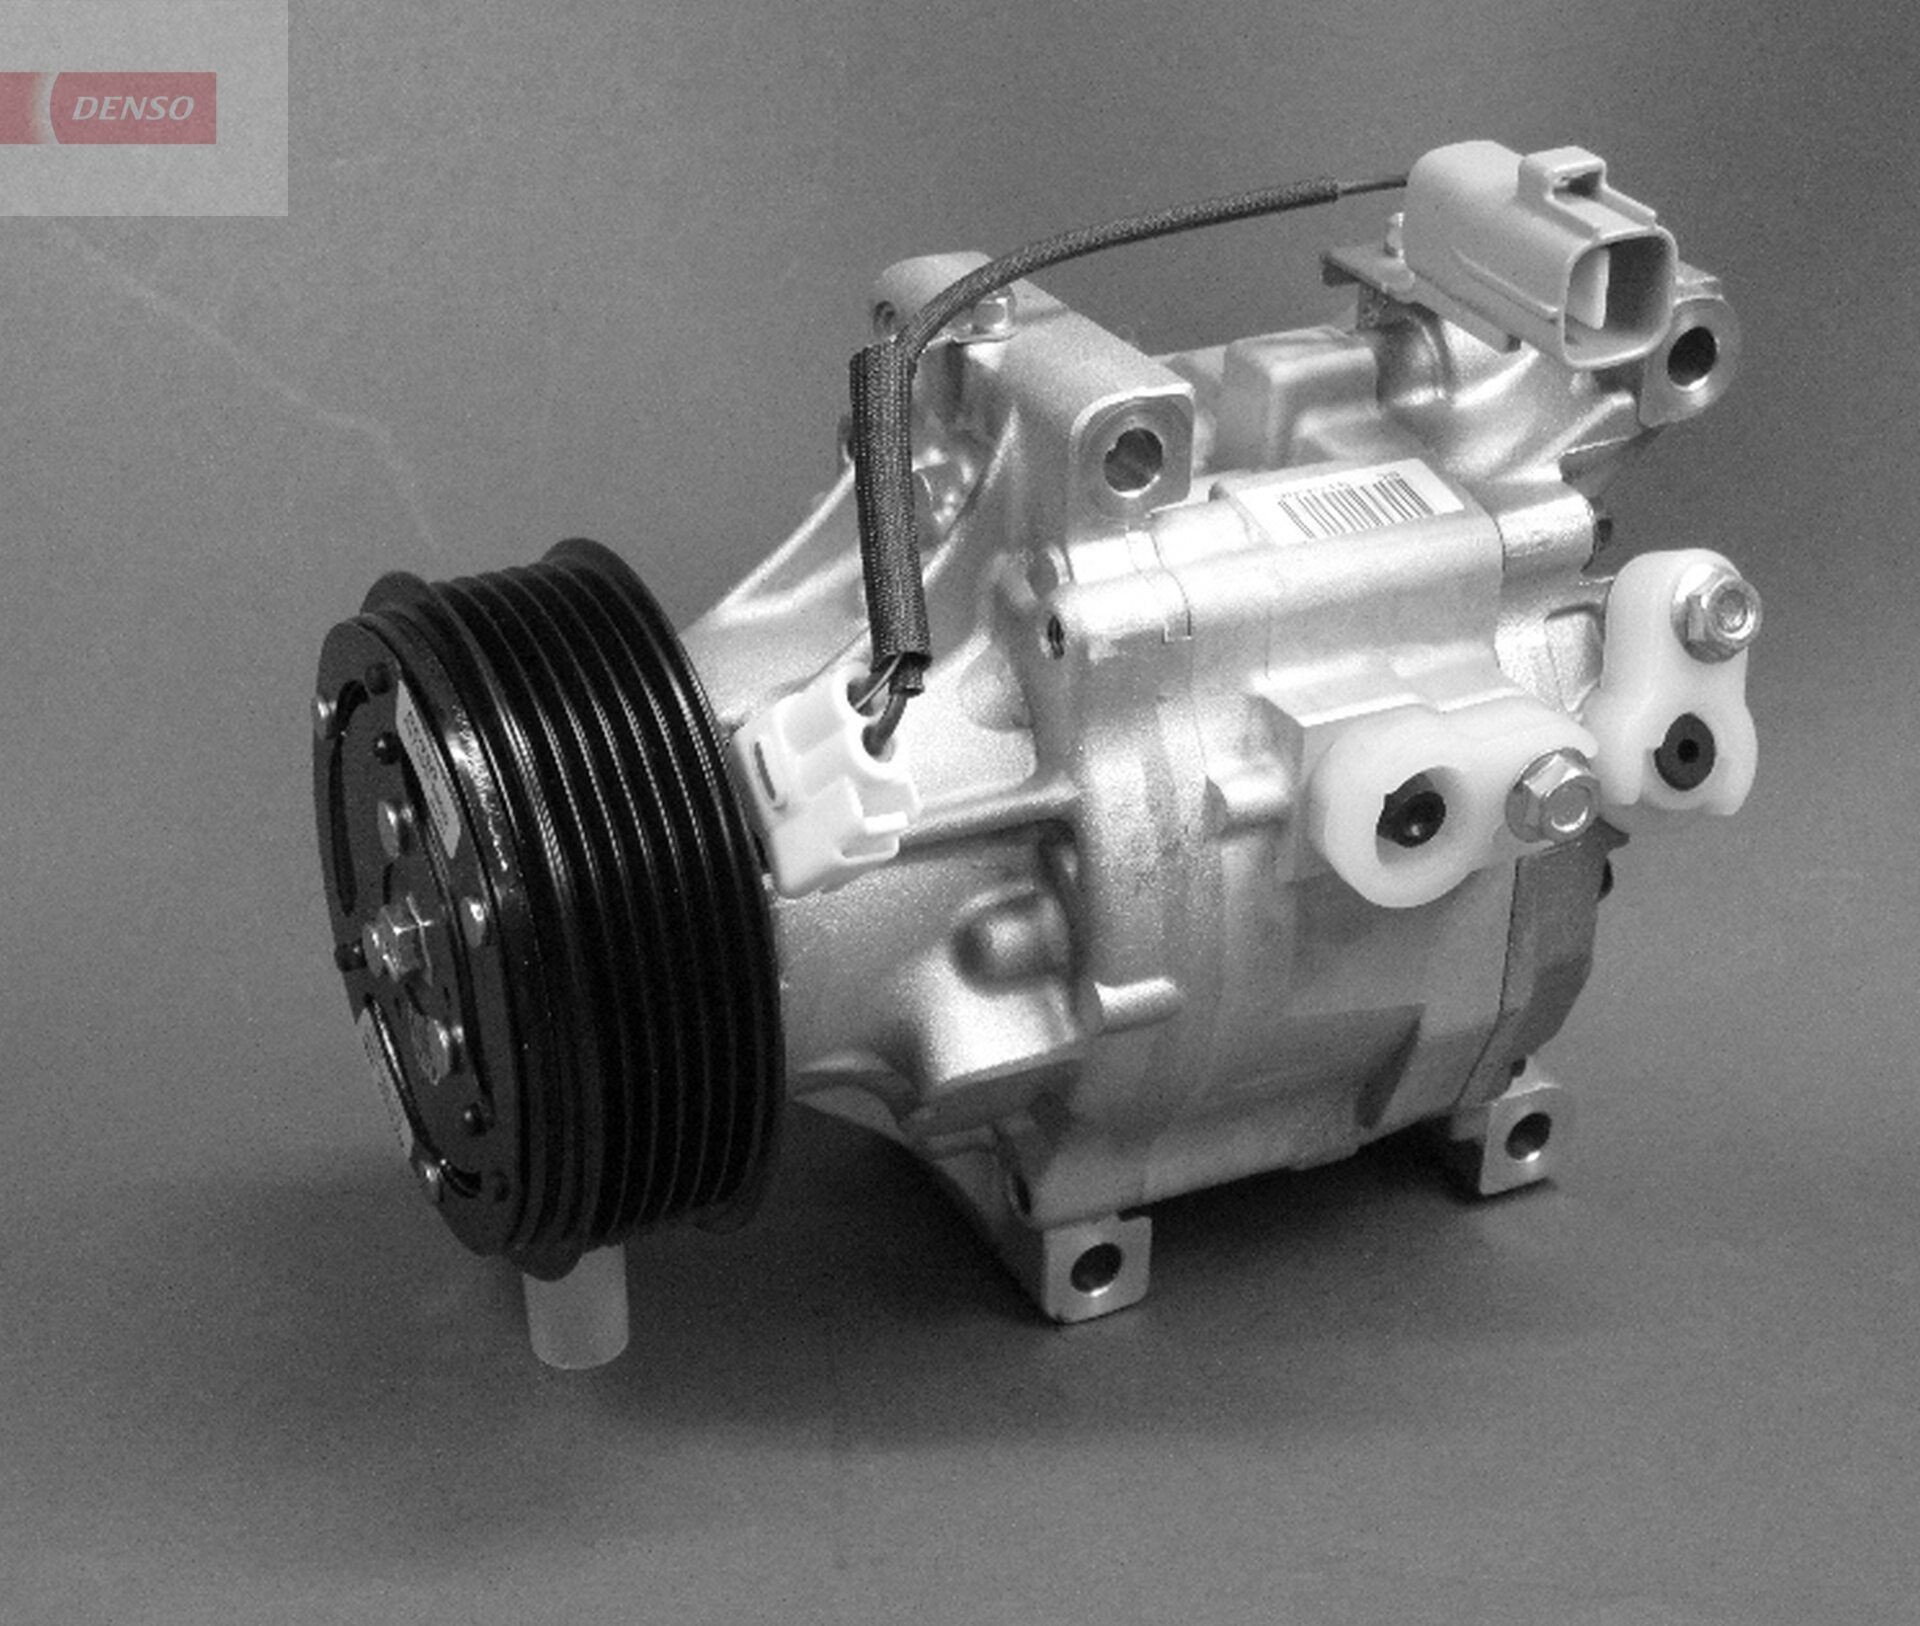 DENSO DCP50015 Air conditioning compressor SCSA06C, 12V, PAG 46, R 134a, with magnetic clutch